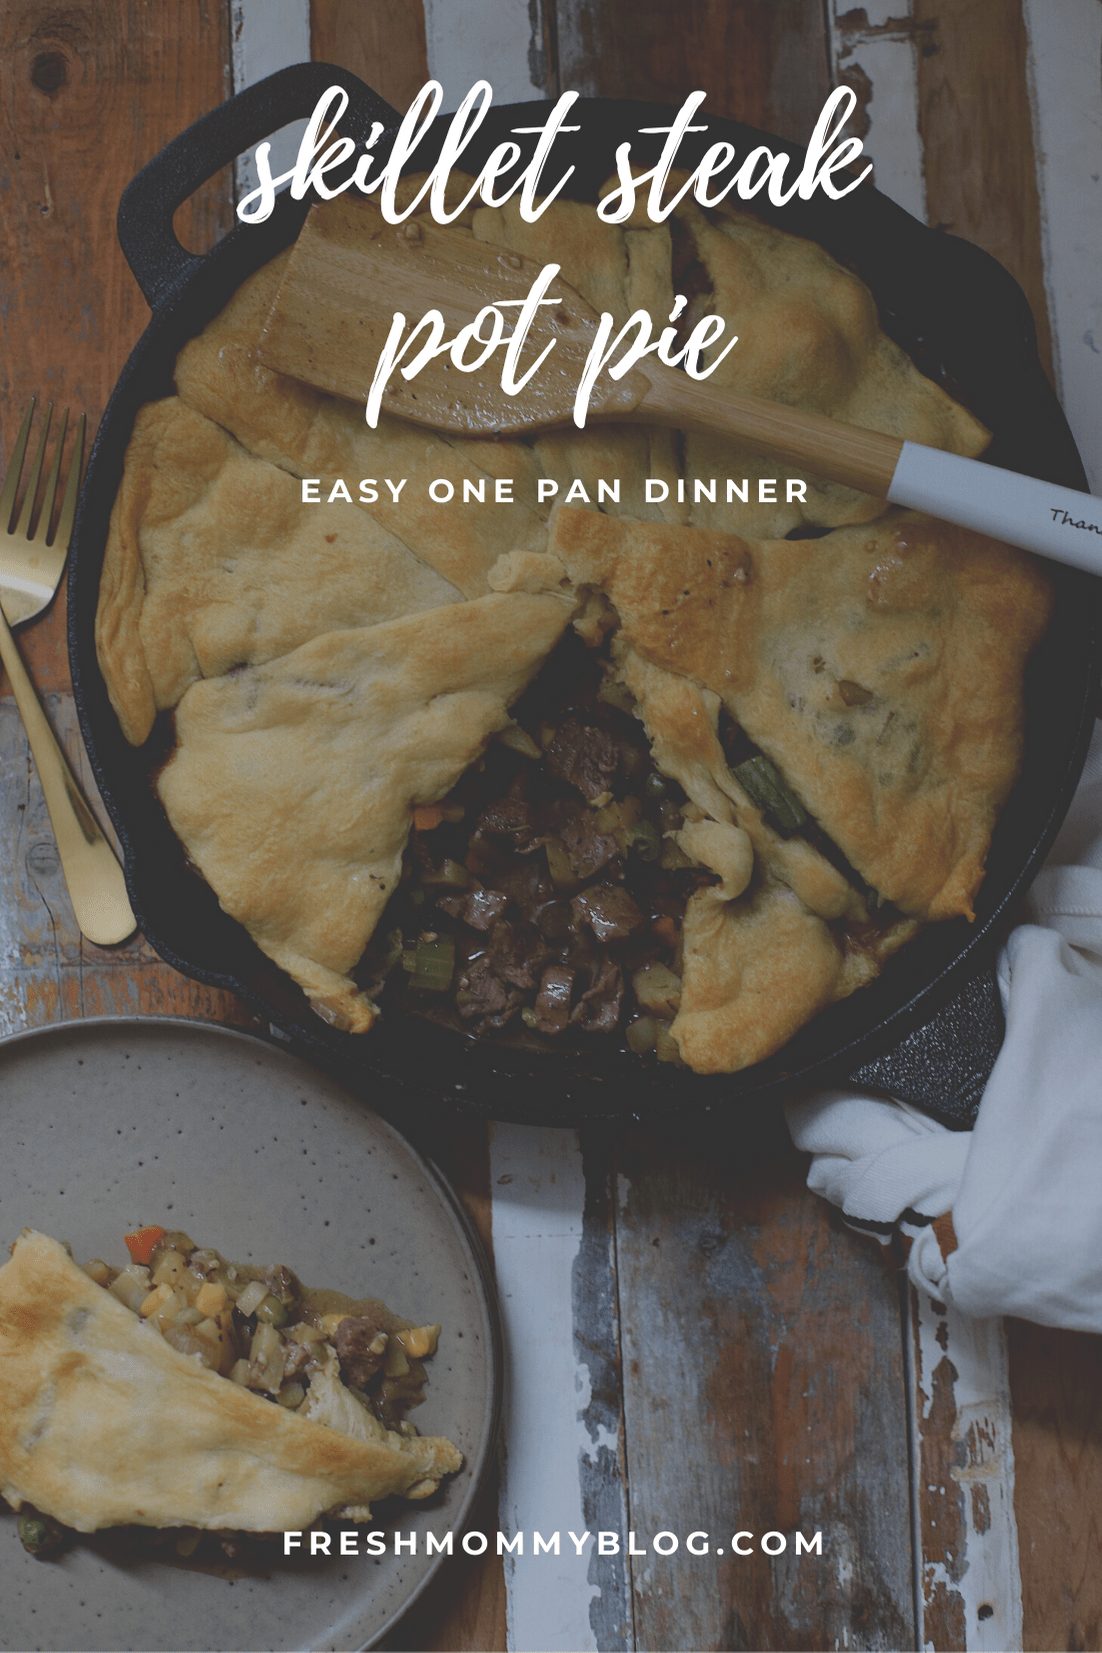 Skillet Steak Pot Pie with Crescent Roll crust for an easy one pan dinner! Beef pot pie recipe from lifestyle blogger Tabitha Blue of Fresh Mommy Blog